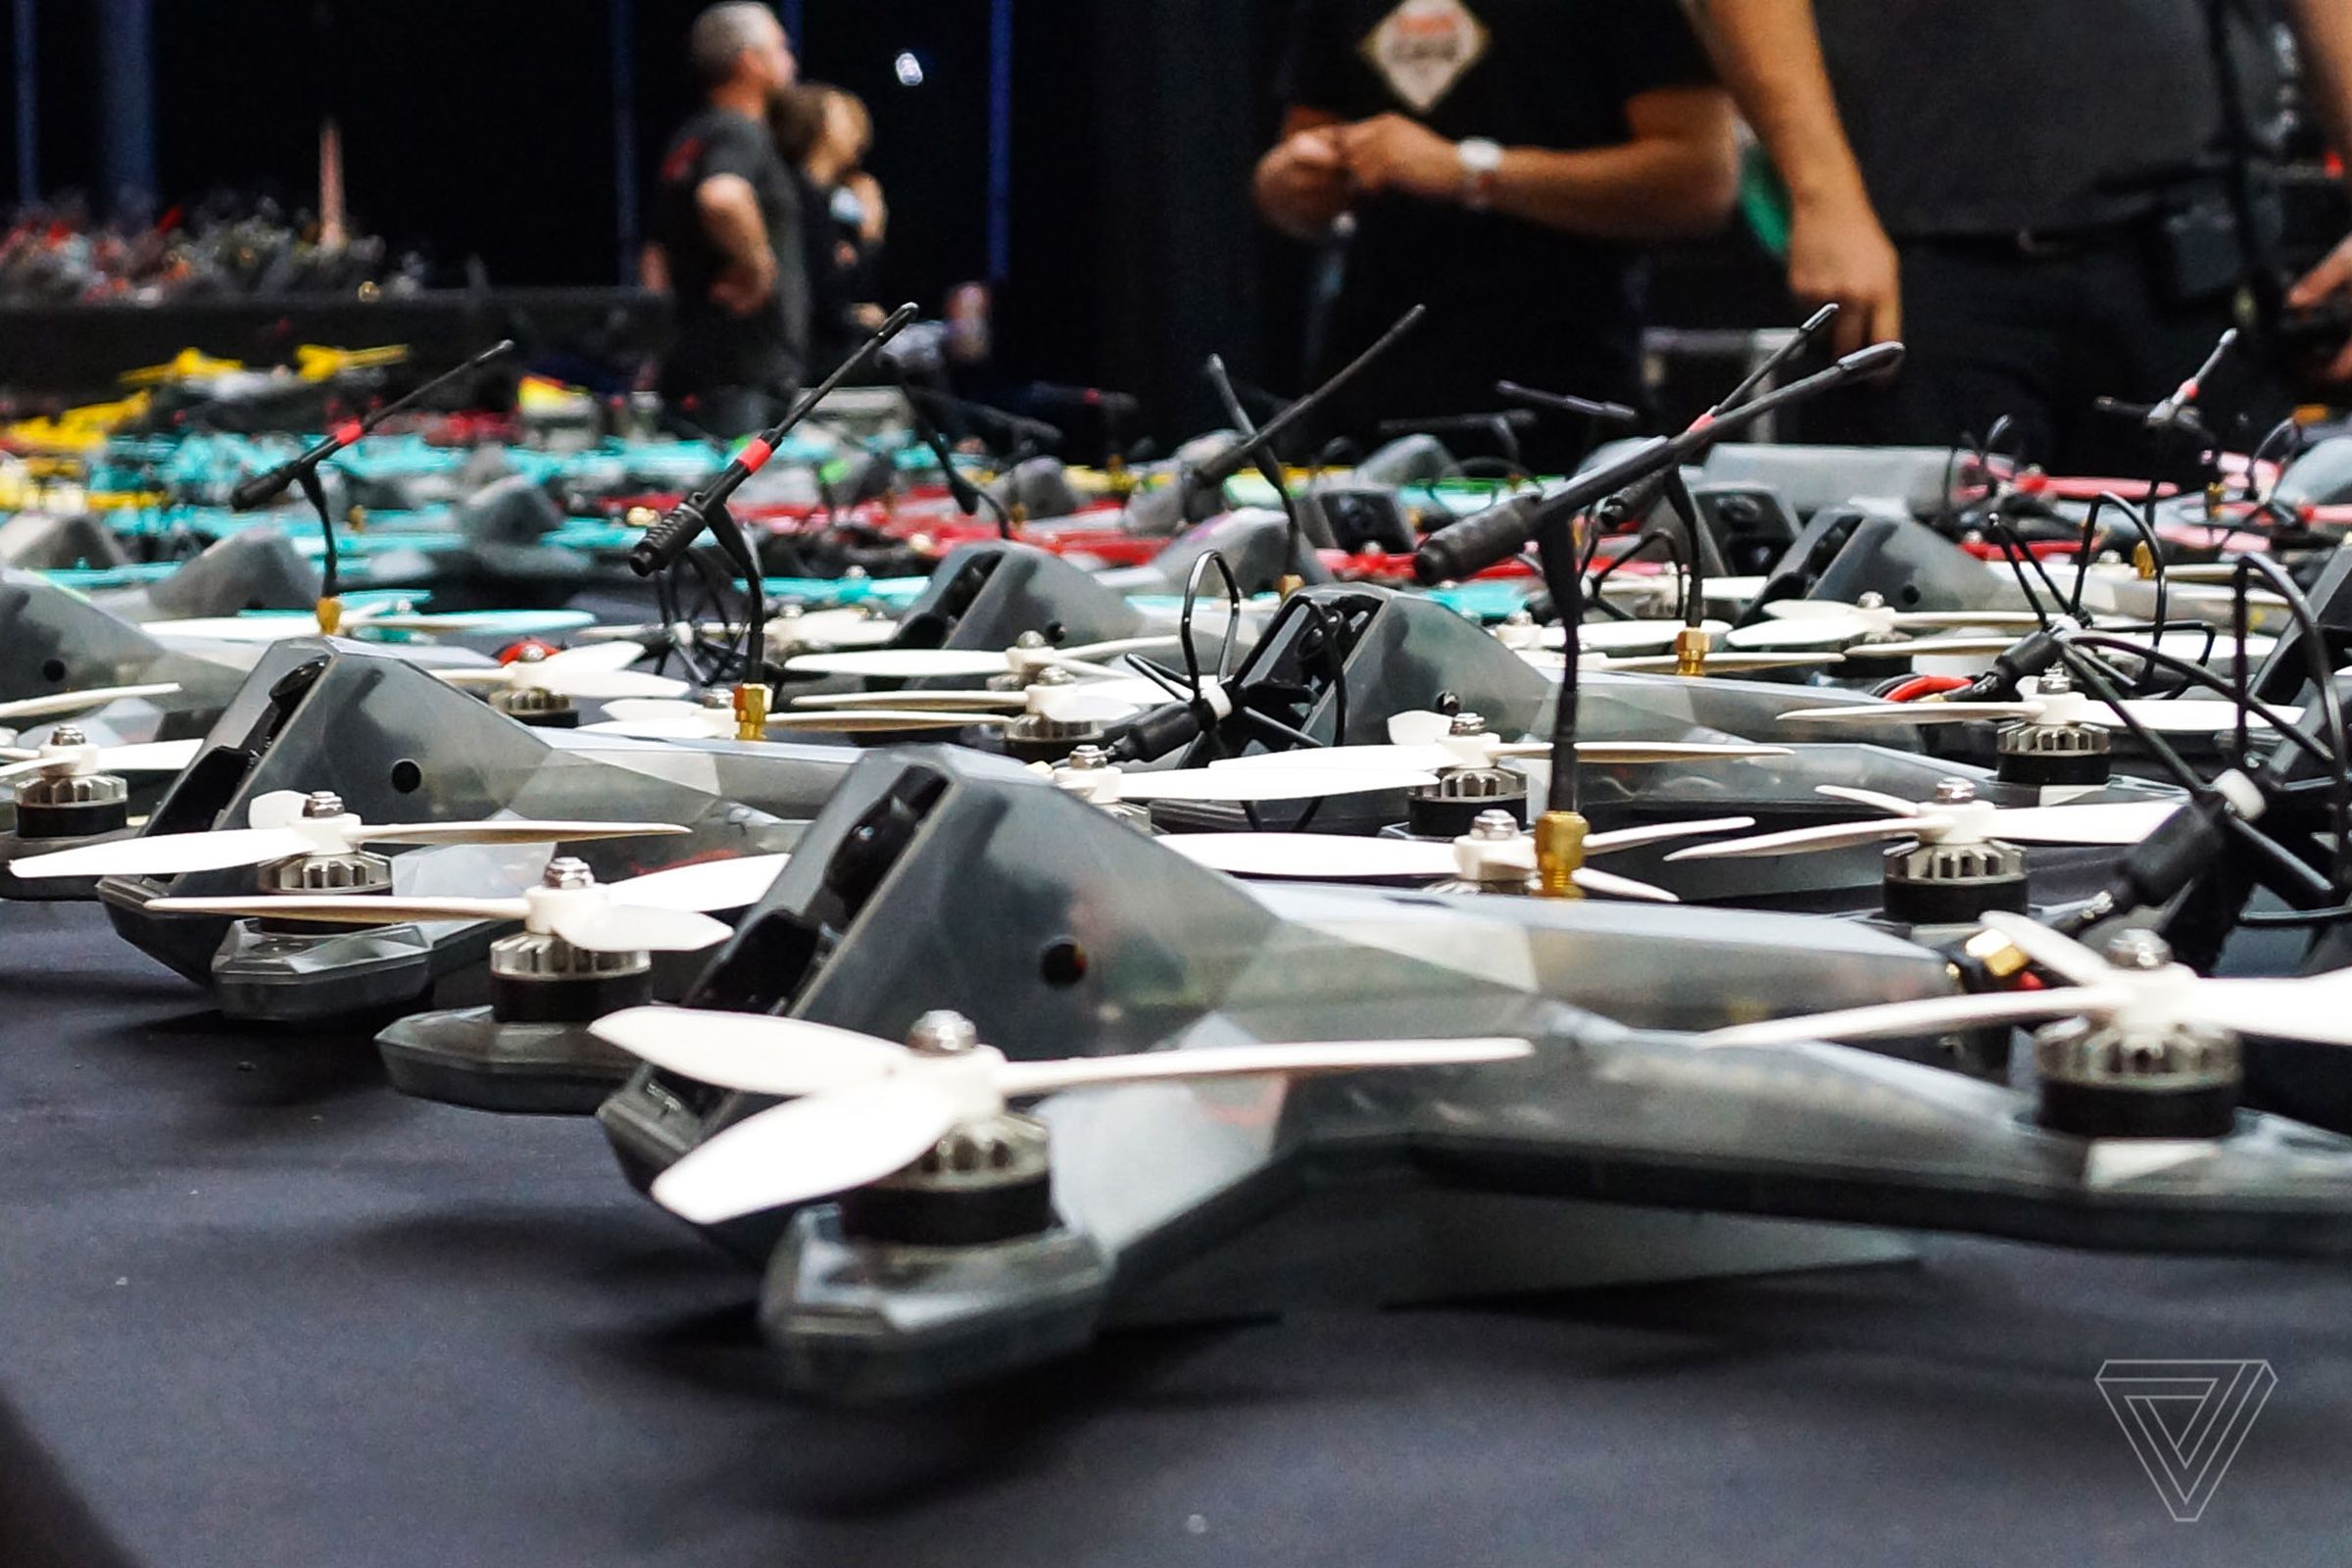 The DRL takes hundreds of identical drones to each race to create a level playing field for the pilots. 